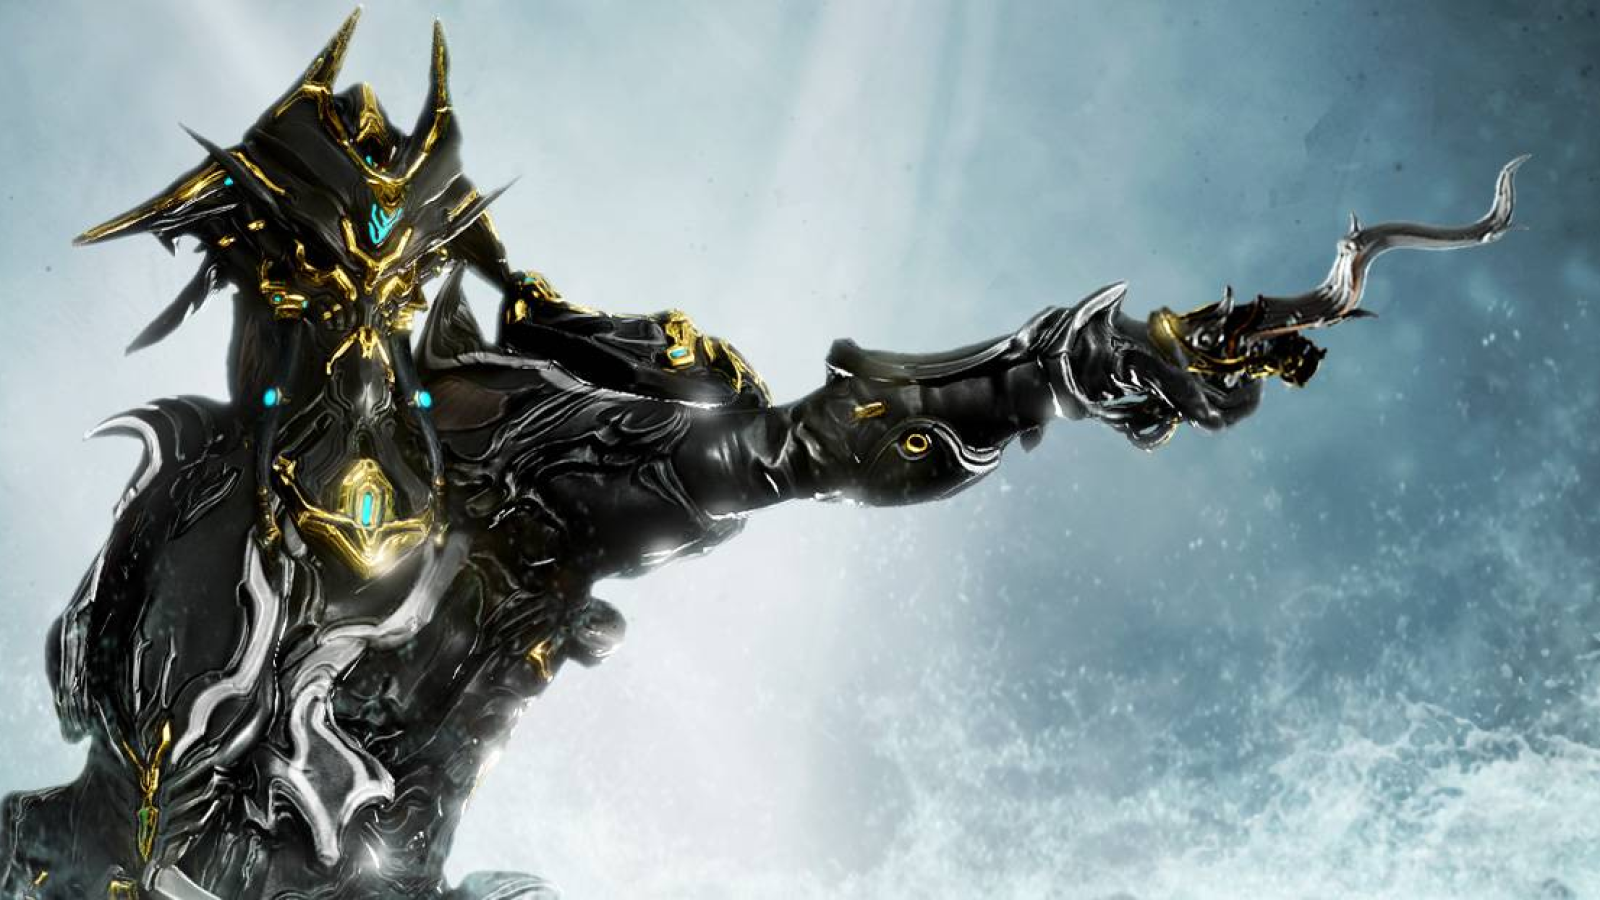 HYDROID PRIME ACCESS KOMMT AM 29. AUGUST!